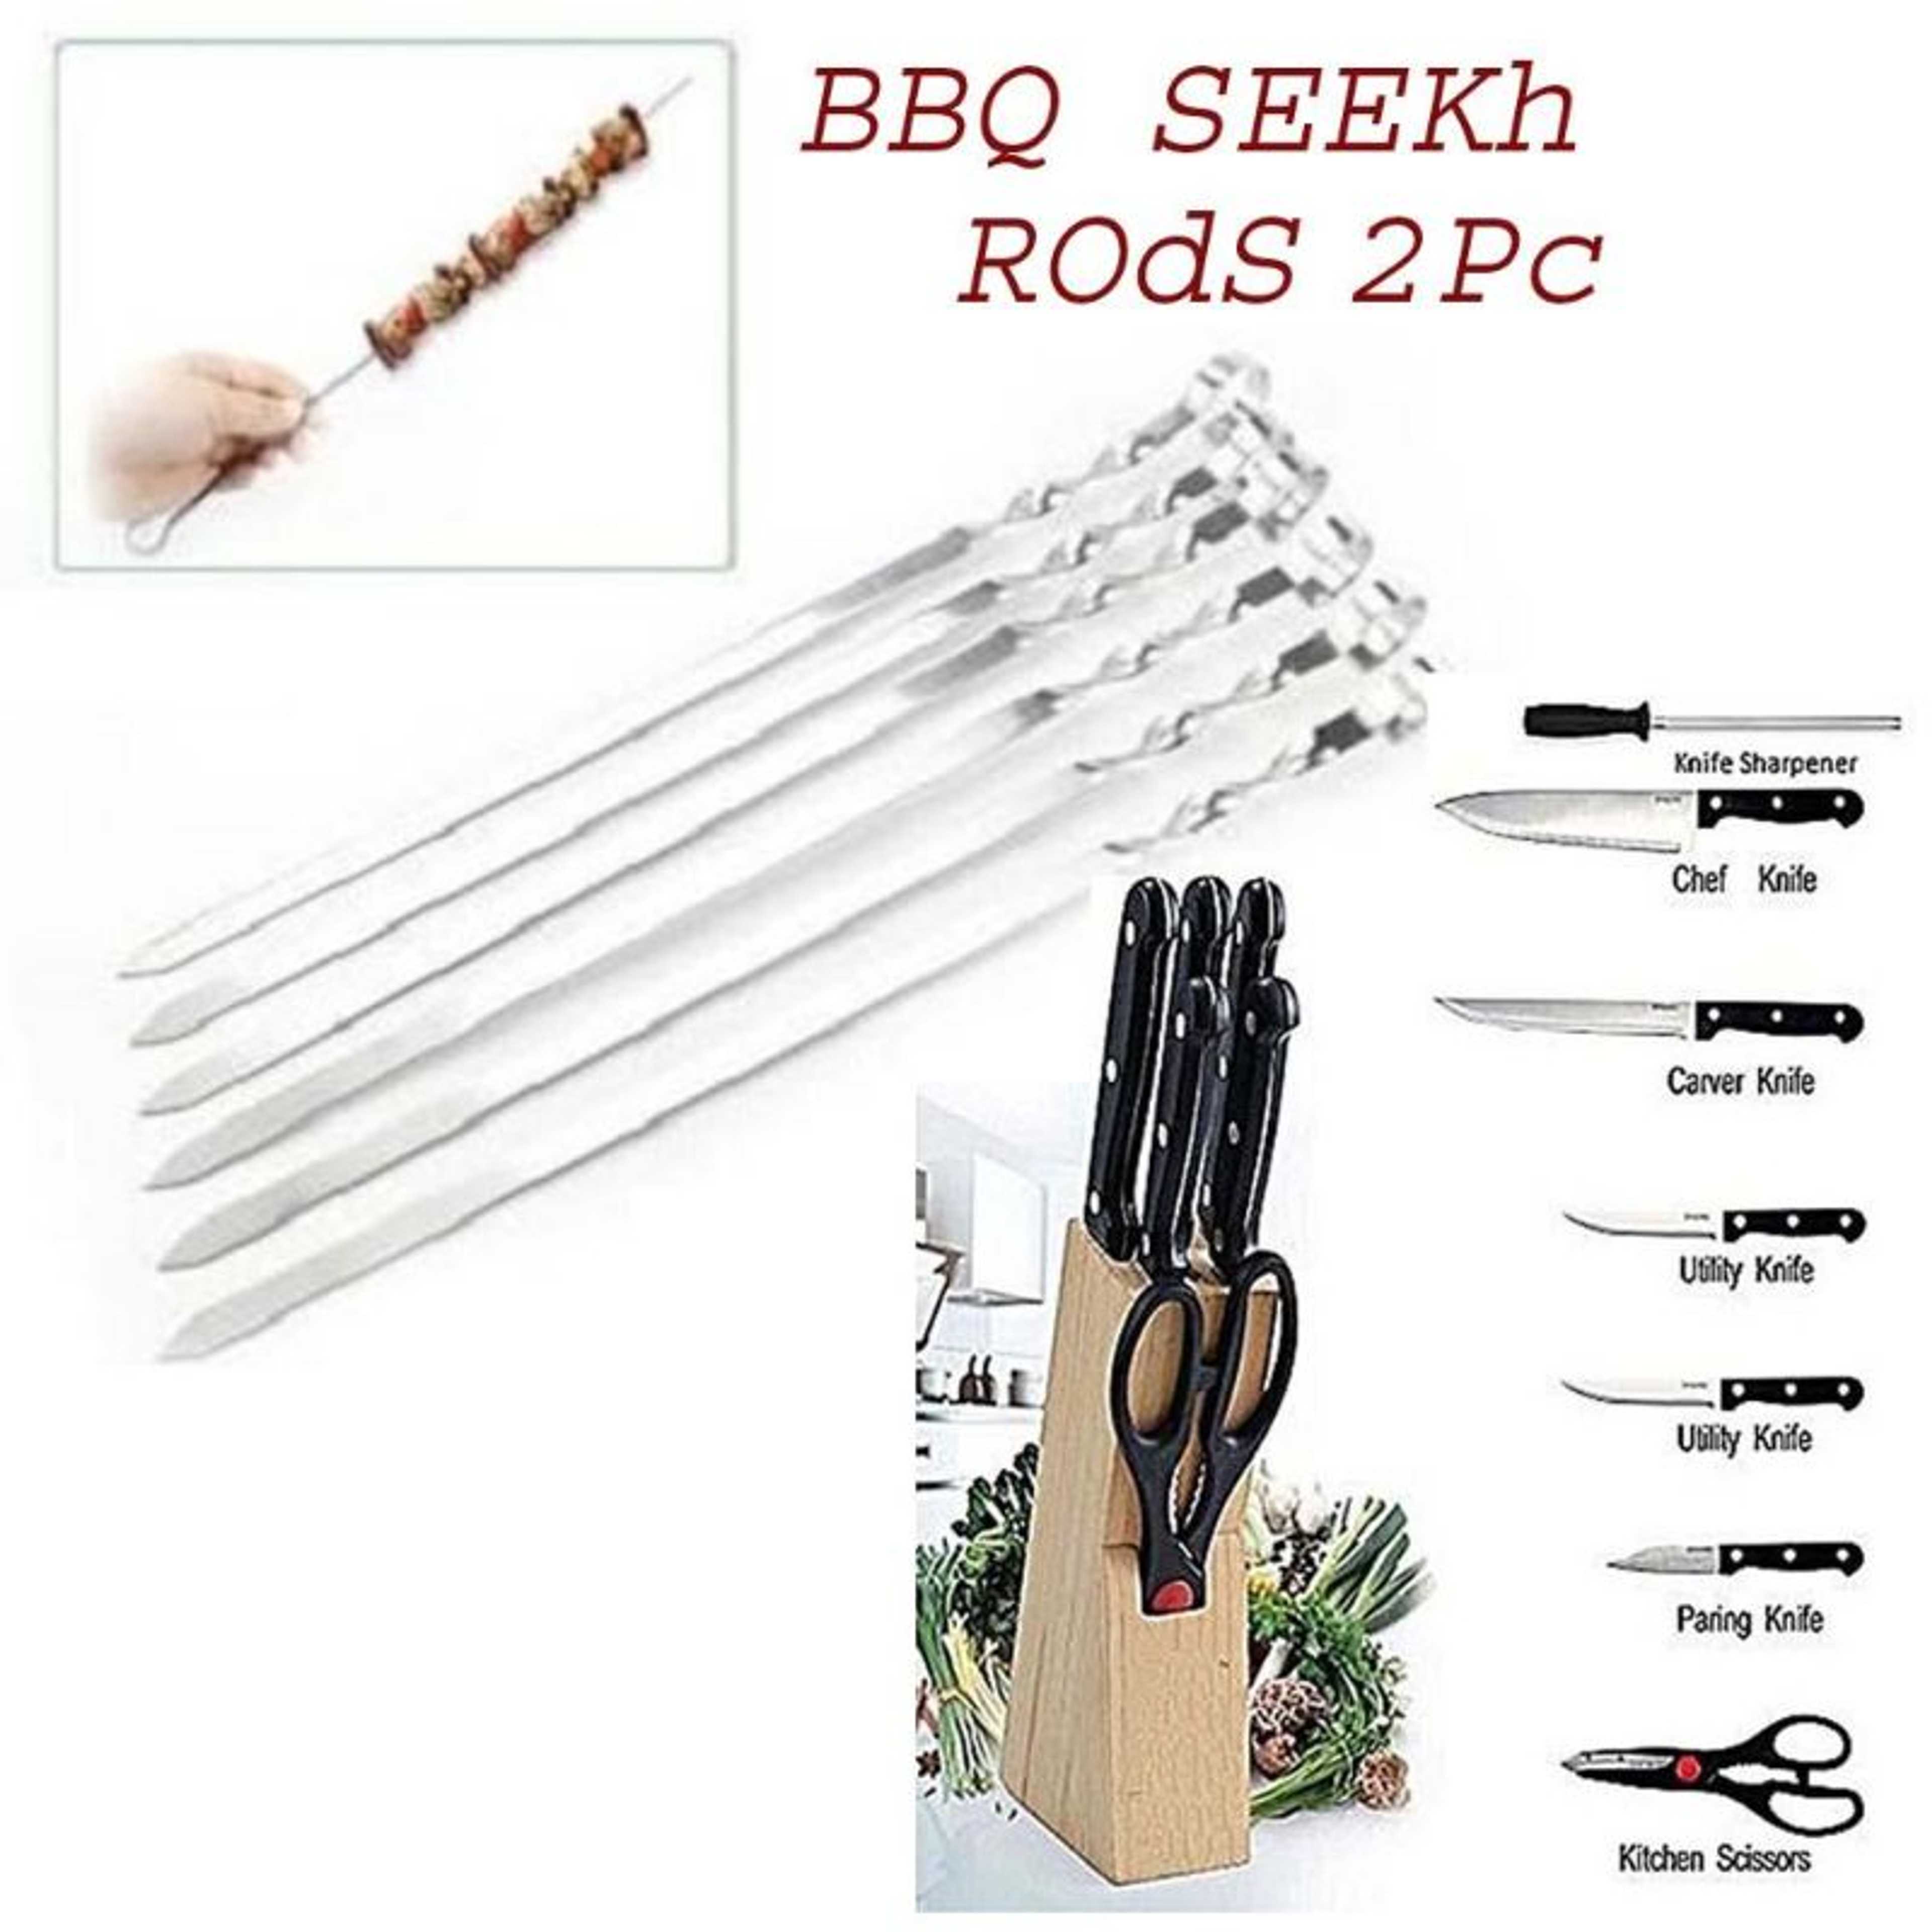 Knife Set With Wooden Stand And BBQ Seekh 2Pc High Quality